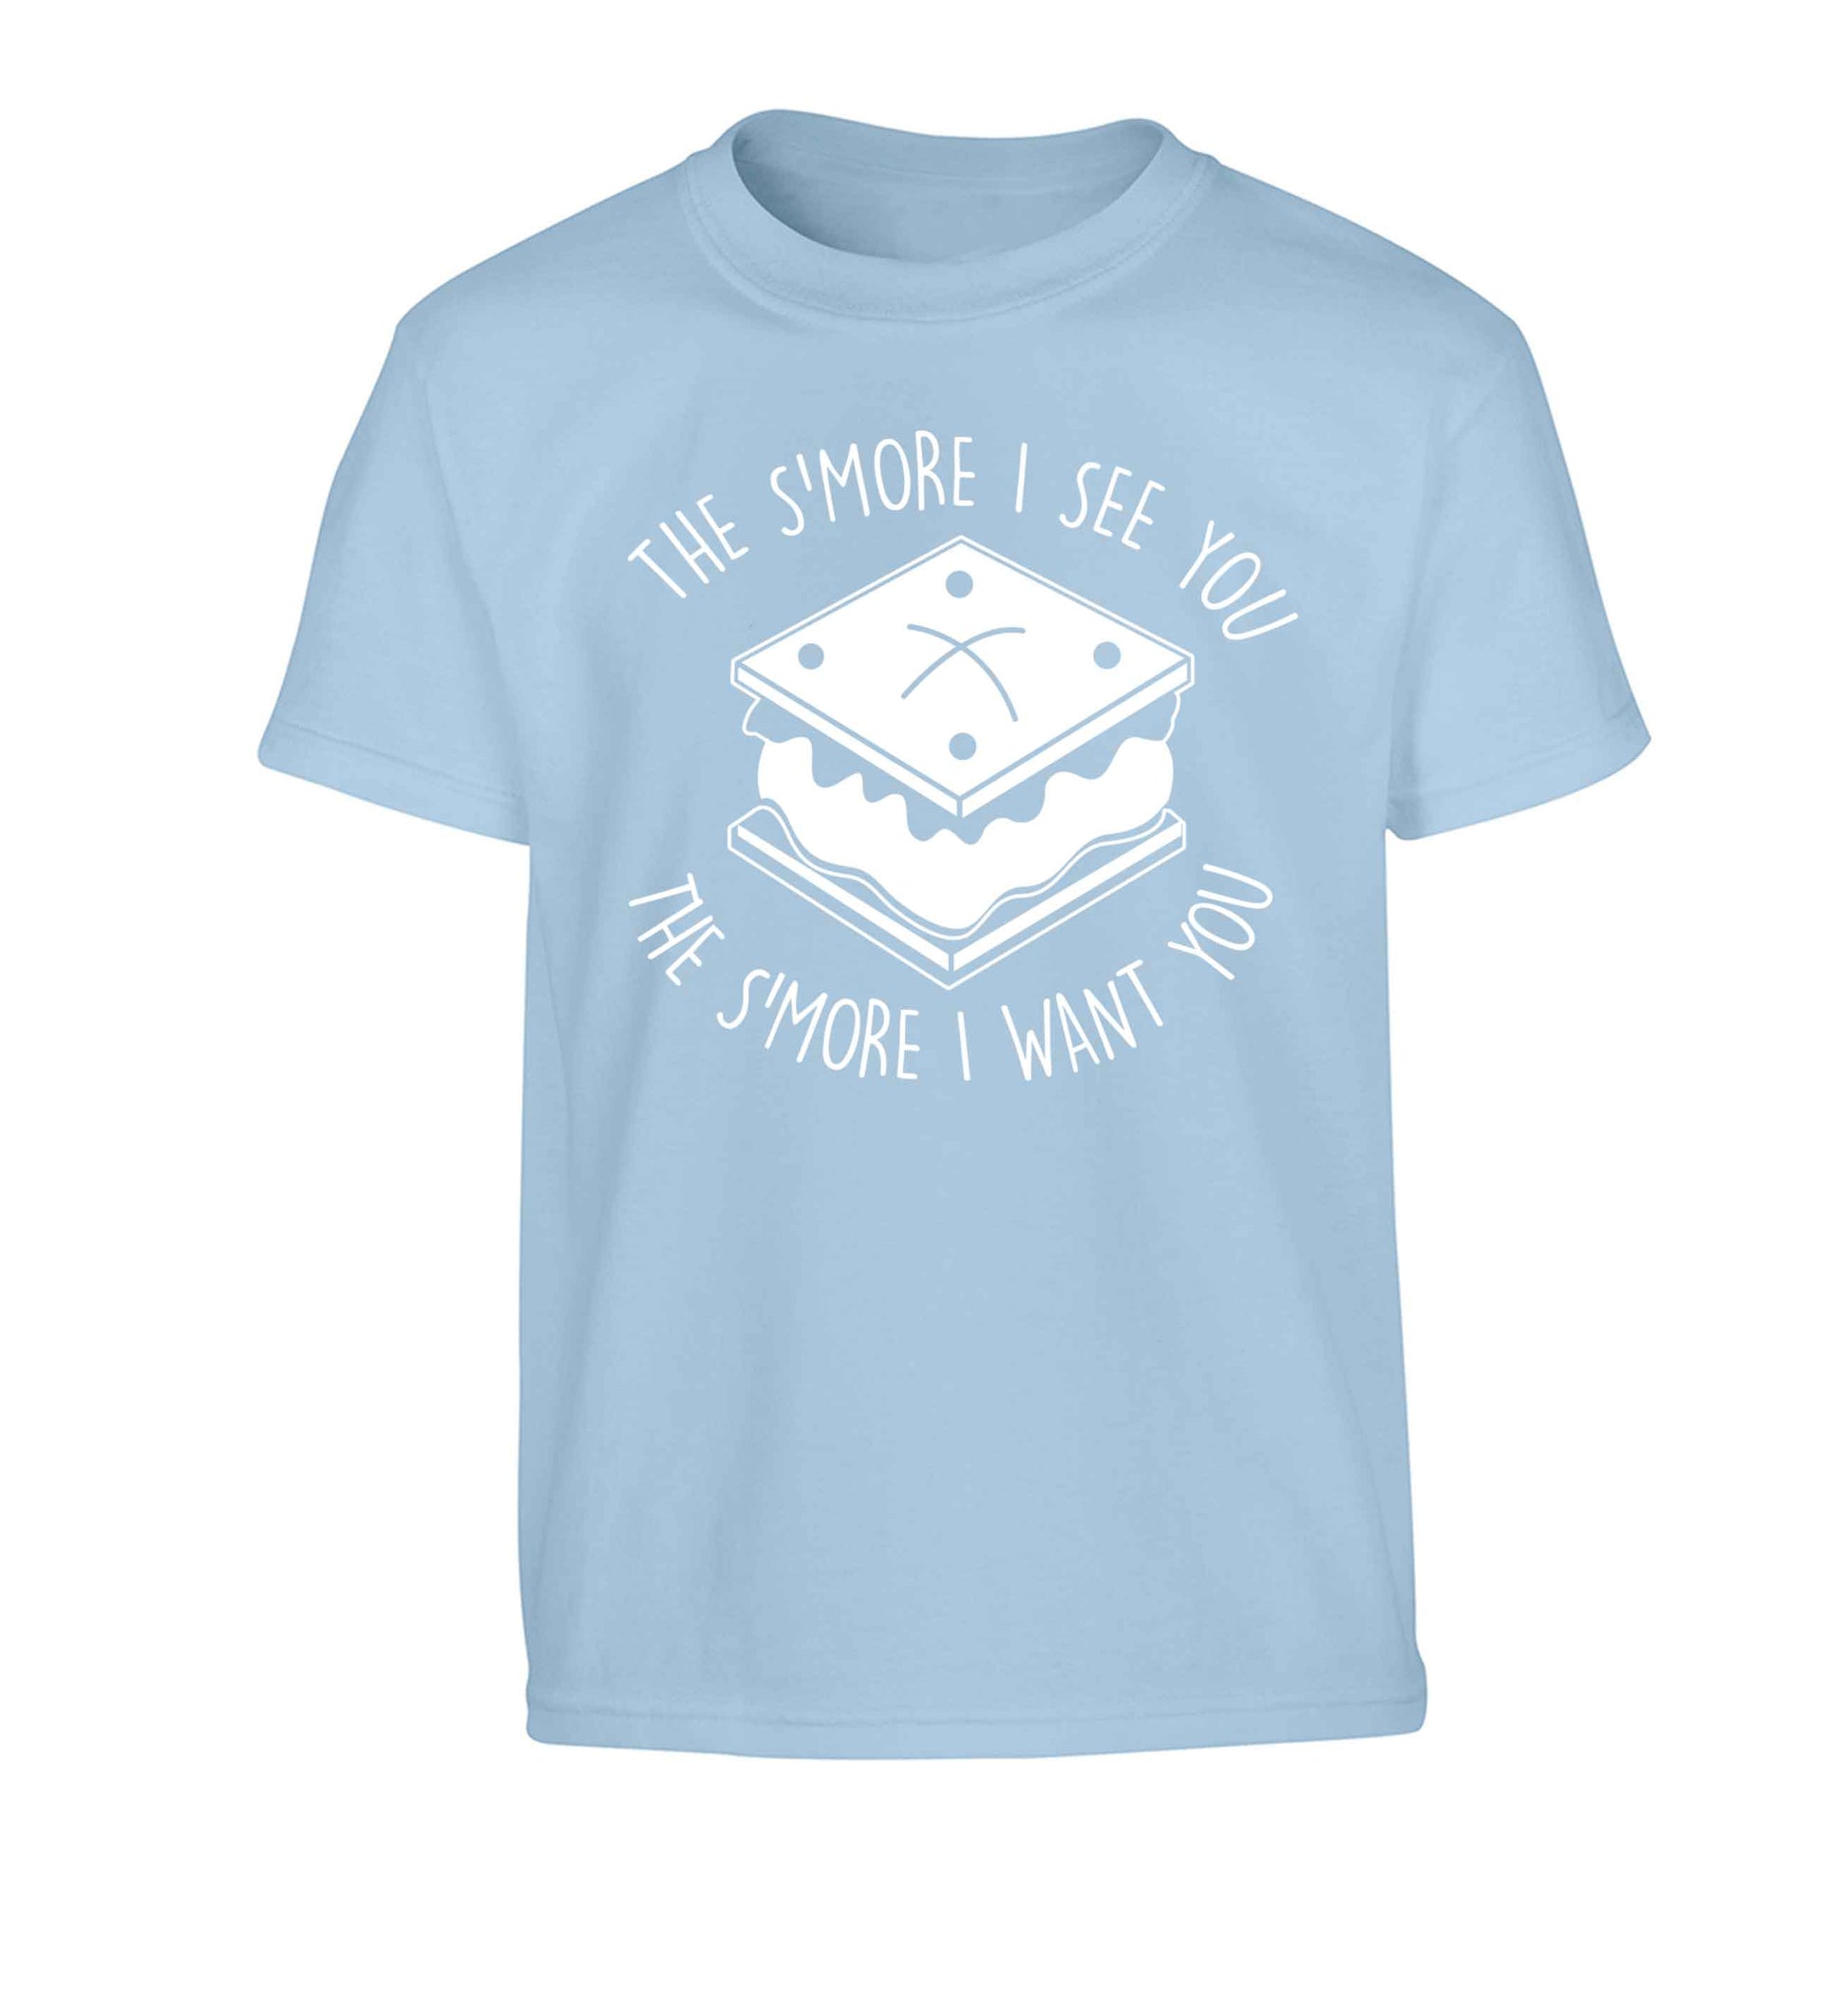 The s'more I see you the s'more I want you Children's light blue Tshirt 12-13 Years